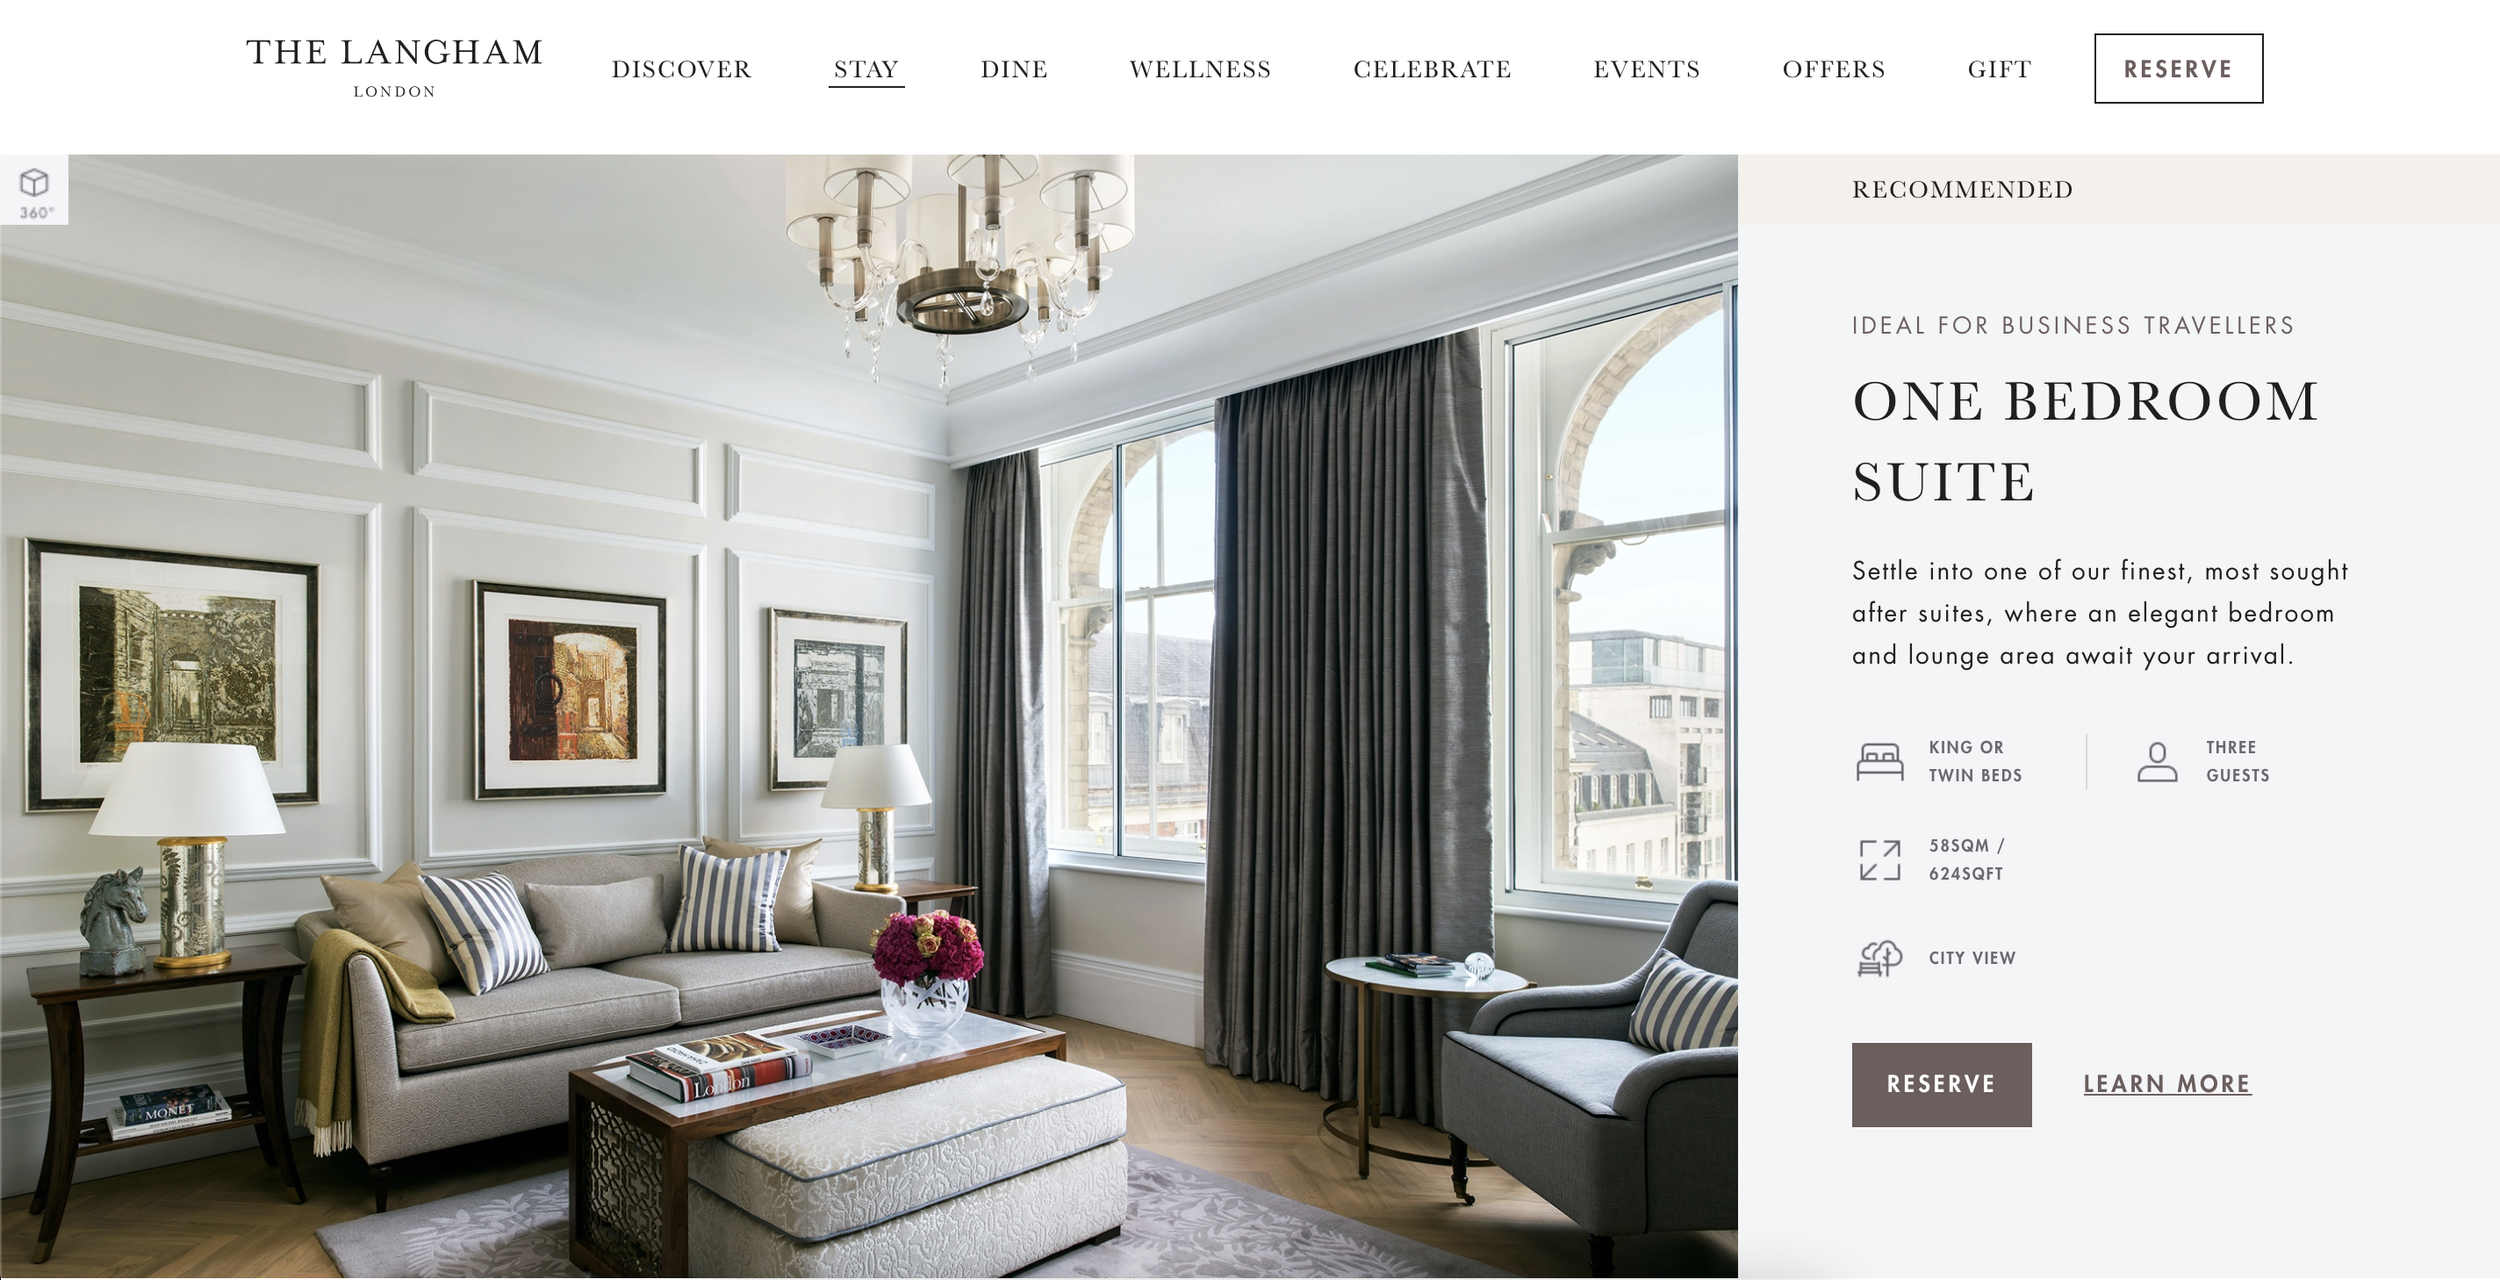 Langham London - Recommended Stay.png